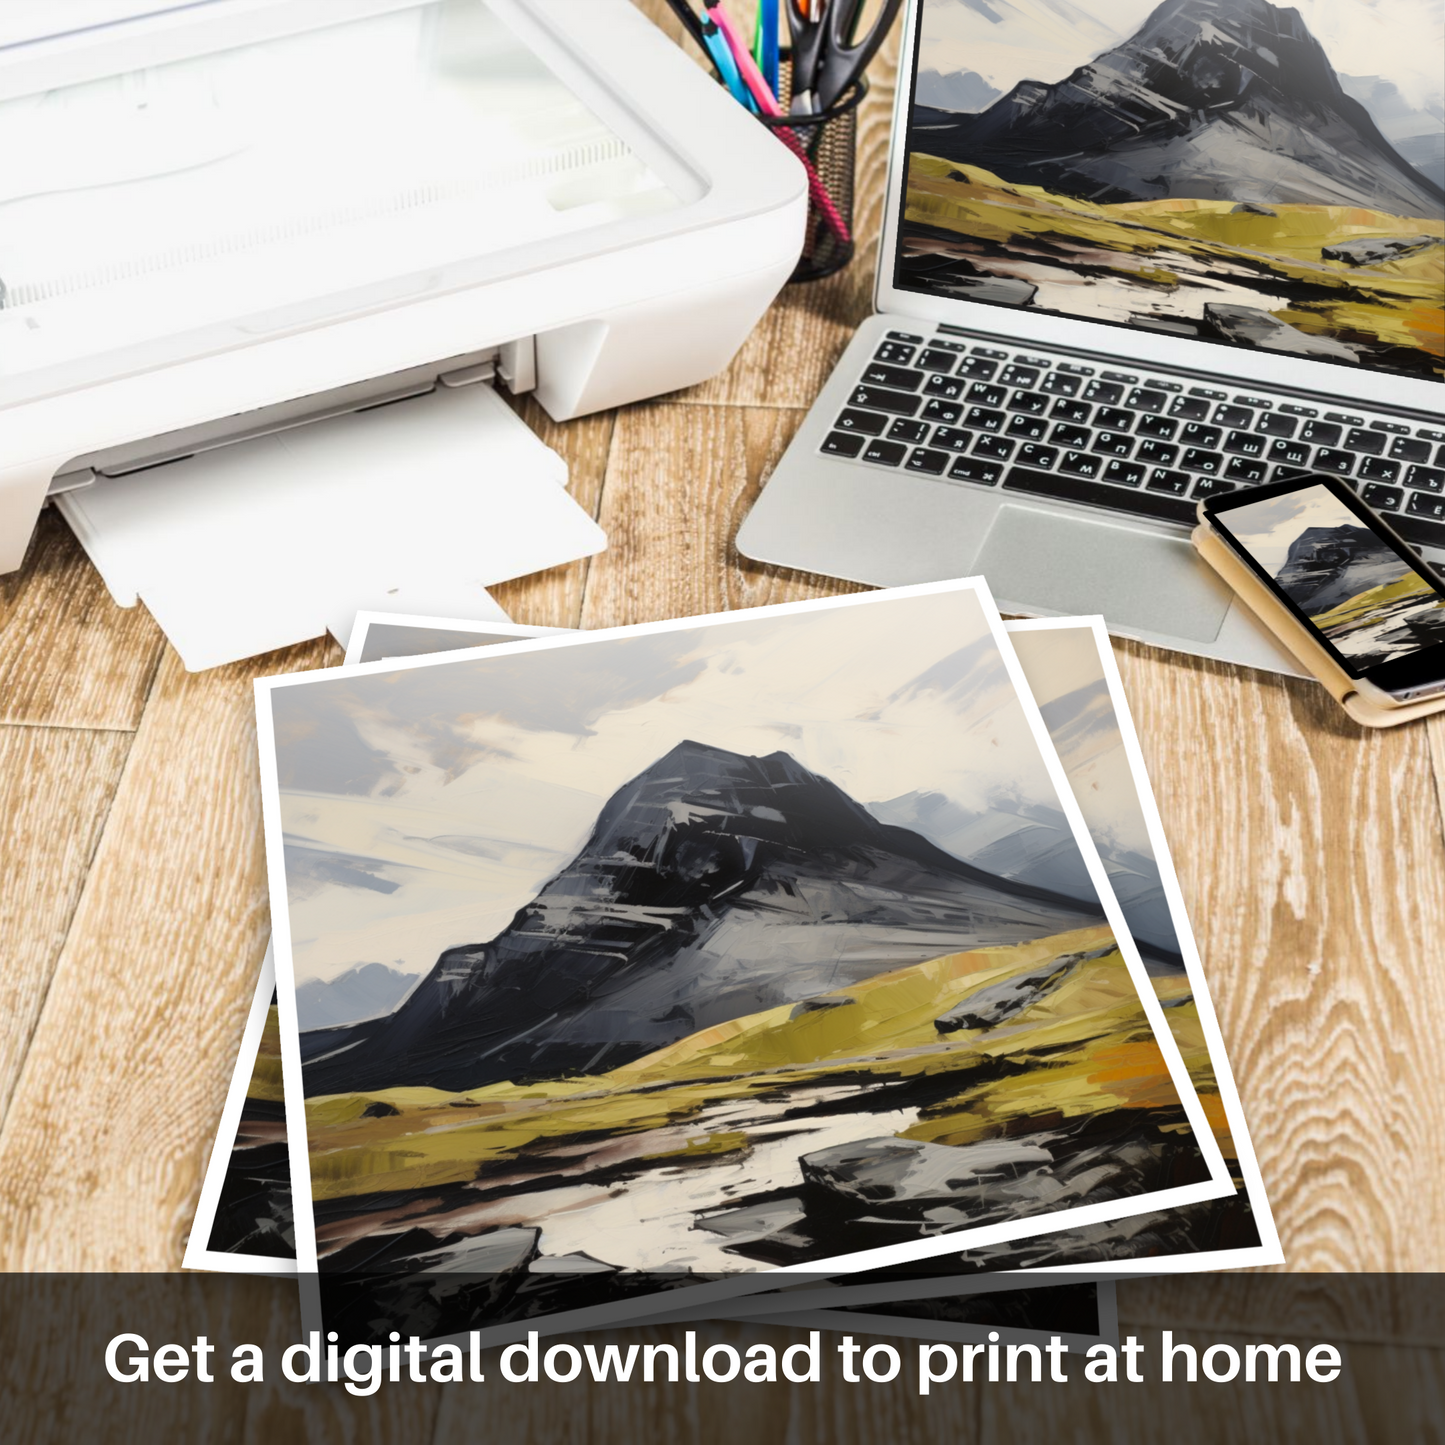 Downloadable and printable picture of Ben More Assynt, Sutherland